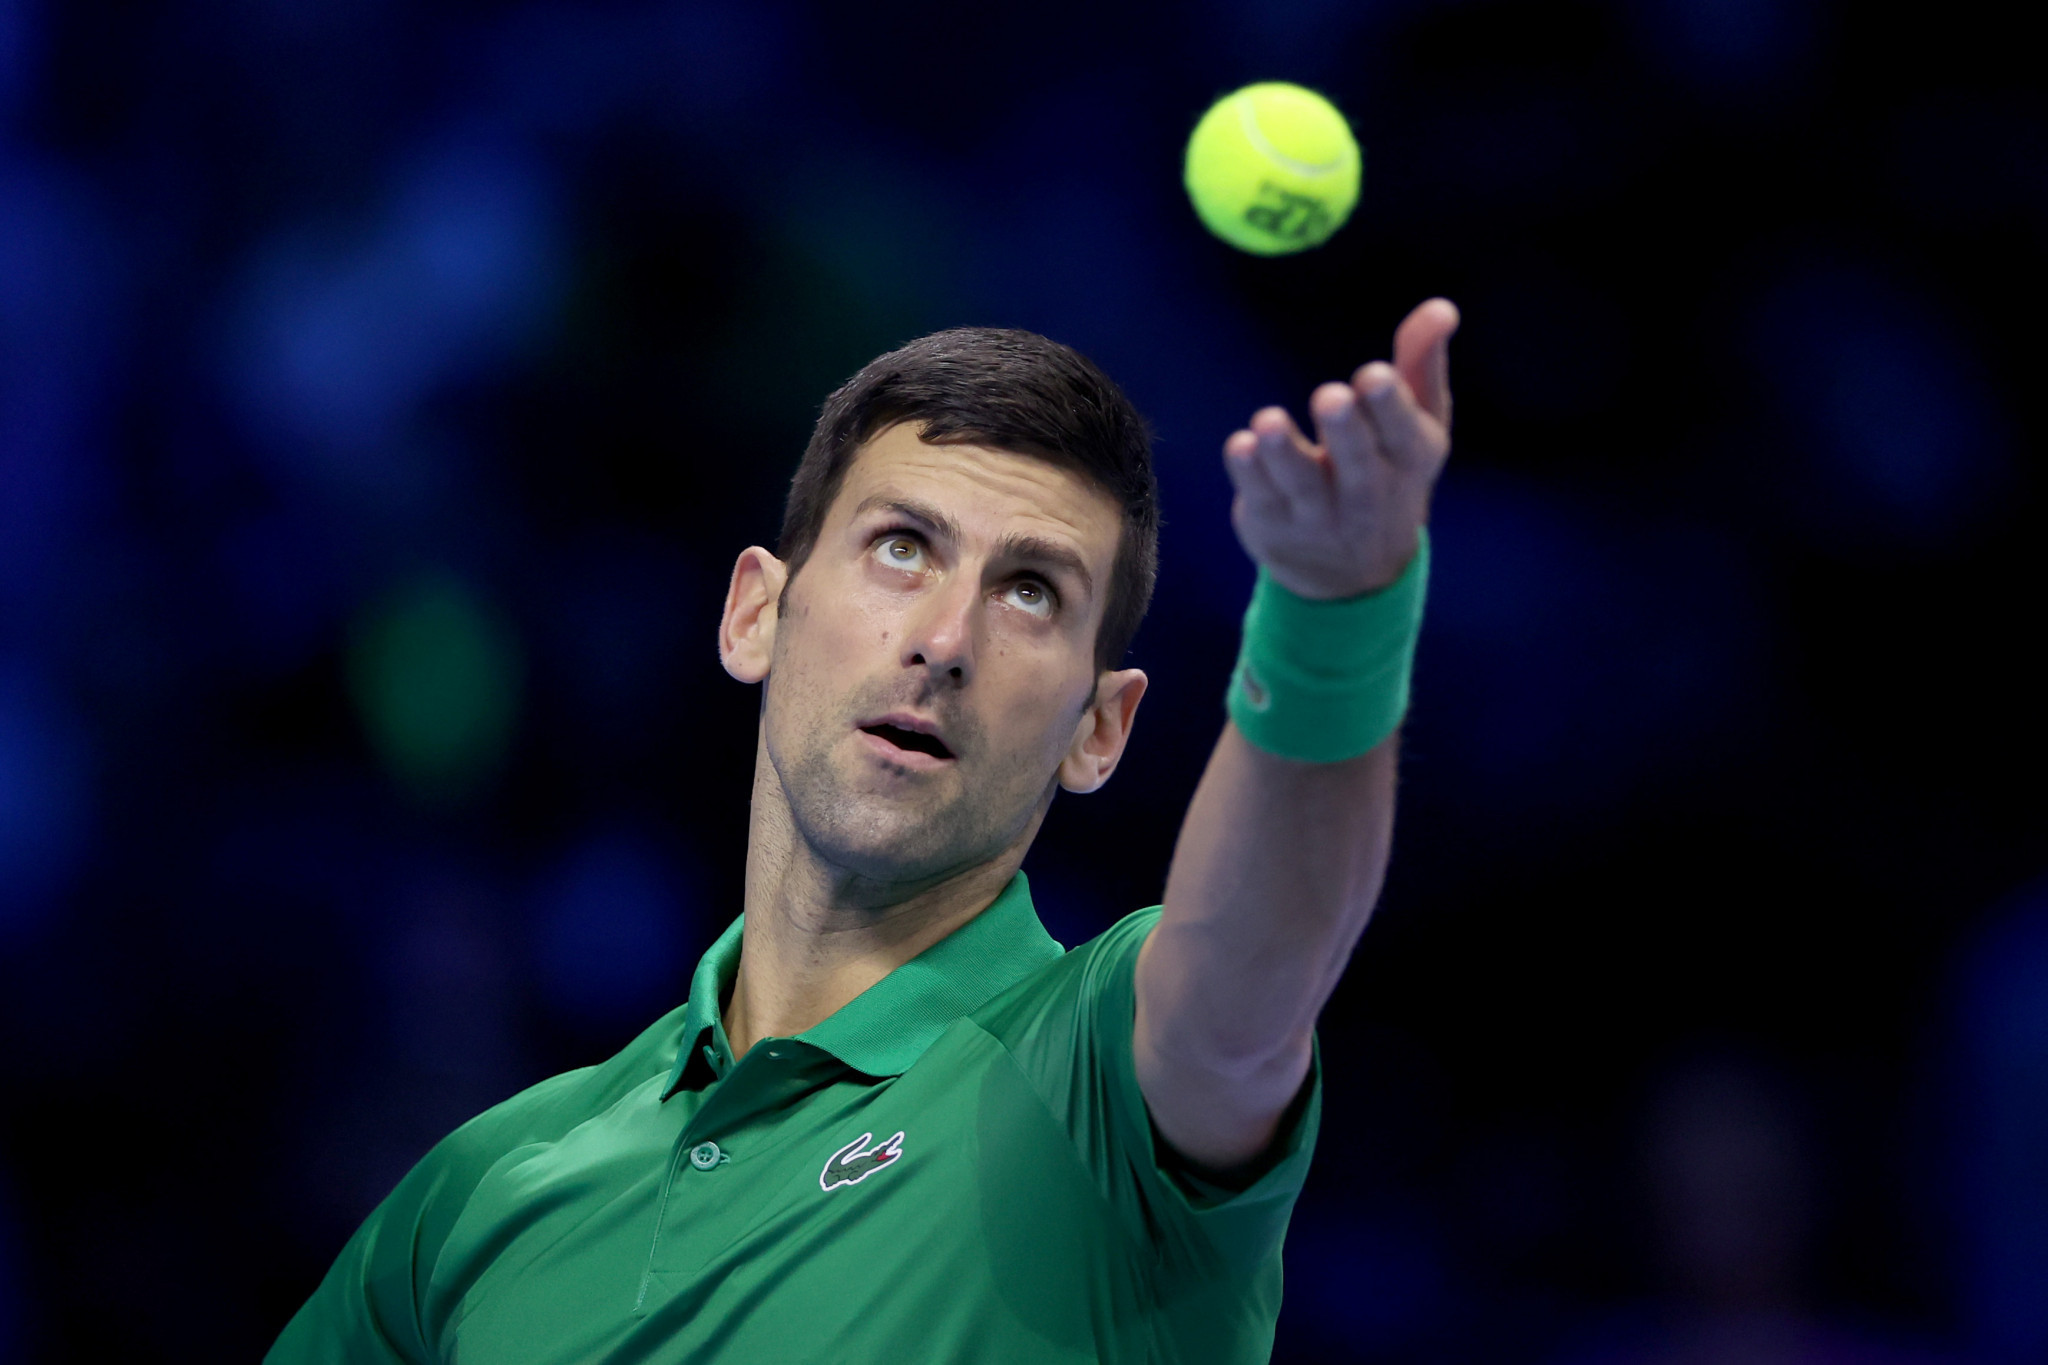 Novak Djokovic reached the last four of the ATP Finals after a straight-sets win over Andrey Rublev ©Getty Images